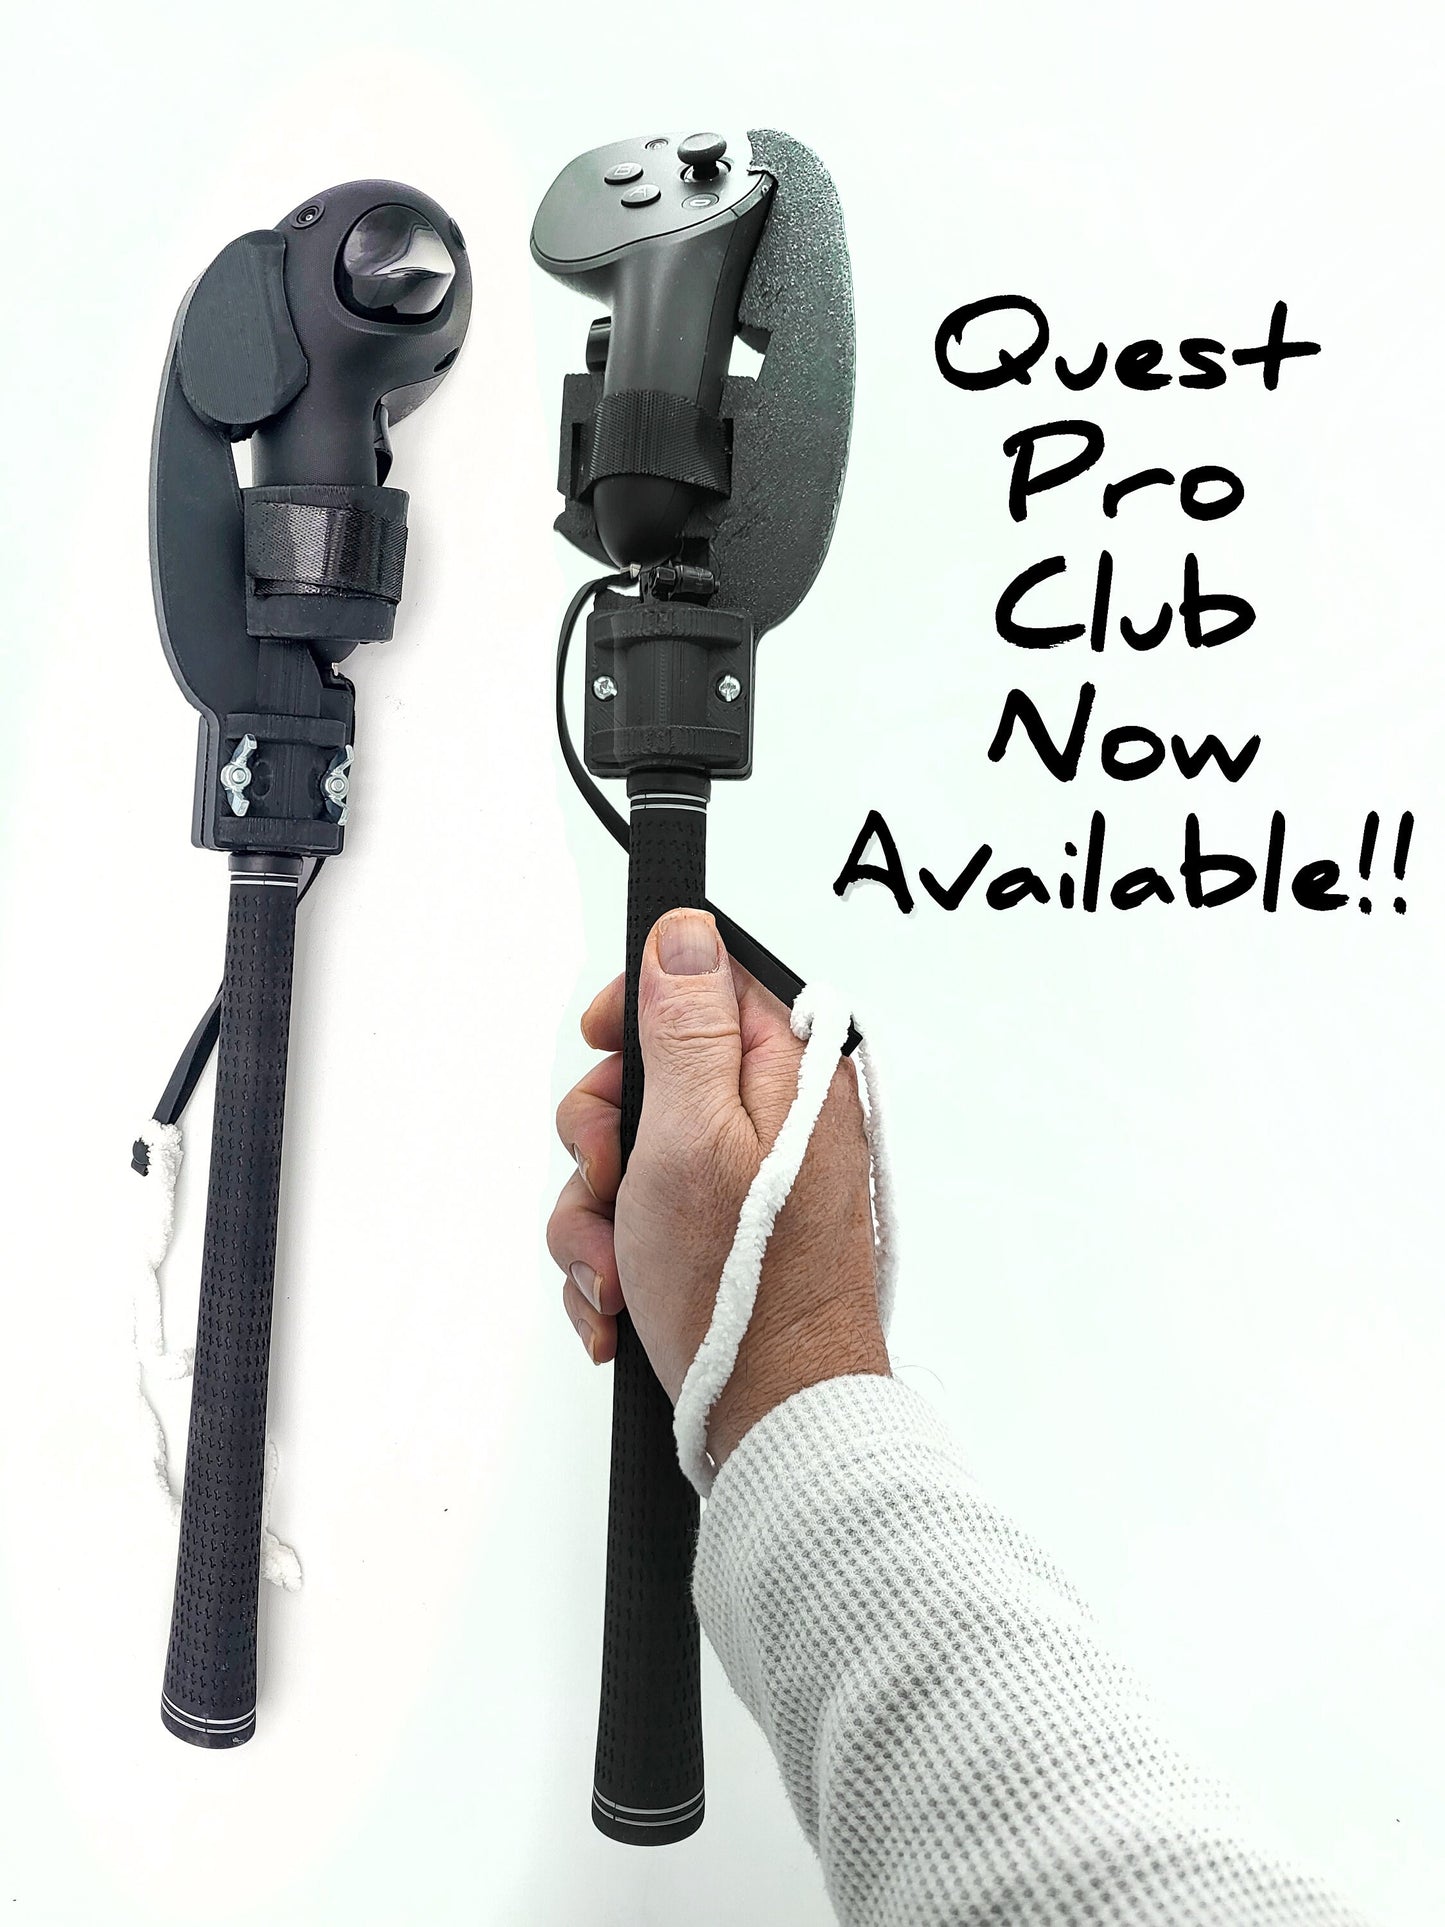 Meta Quest 2 and Quest Pro Golf Club